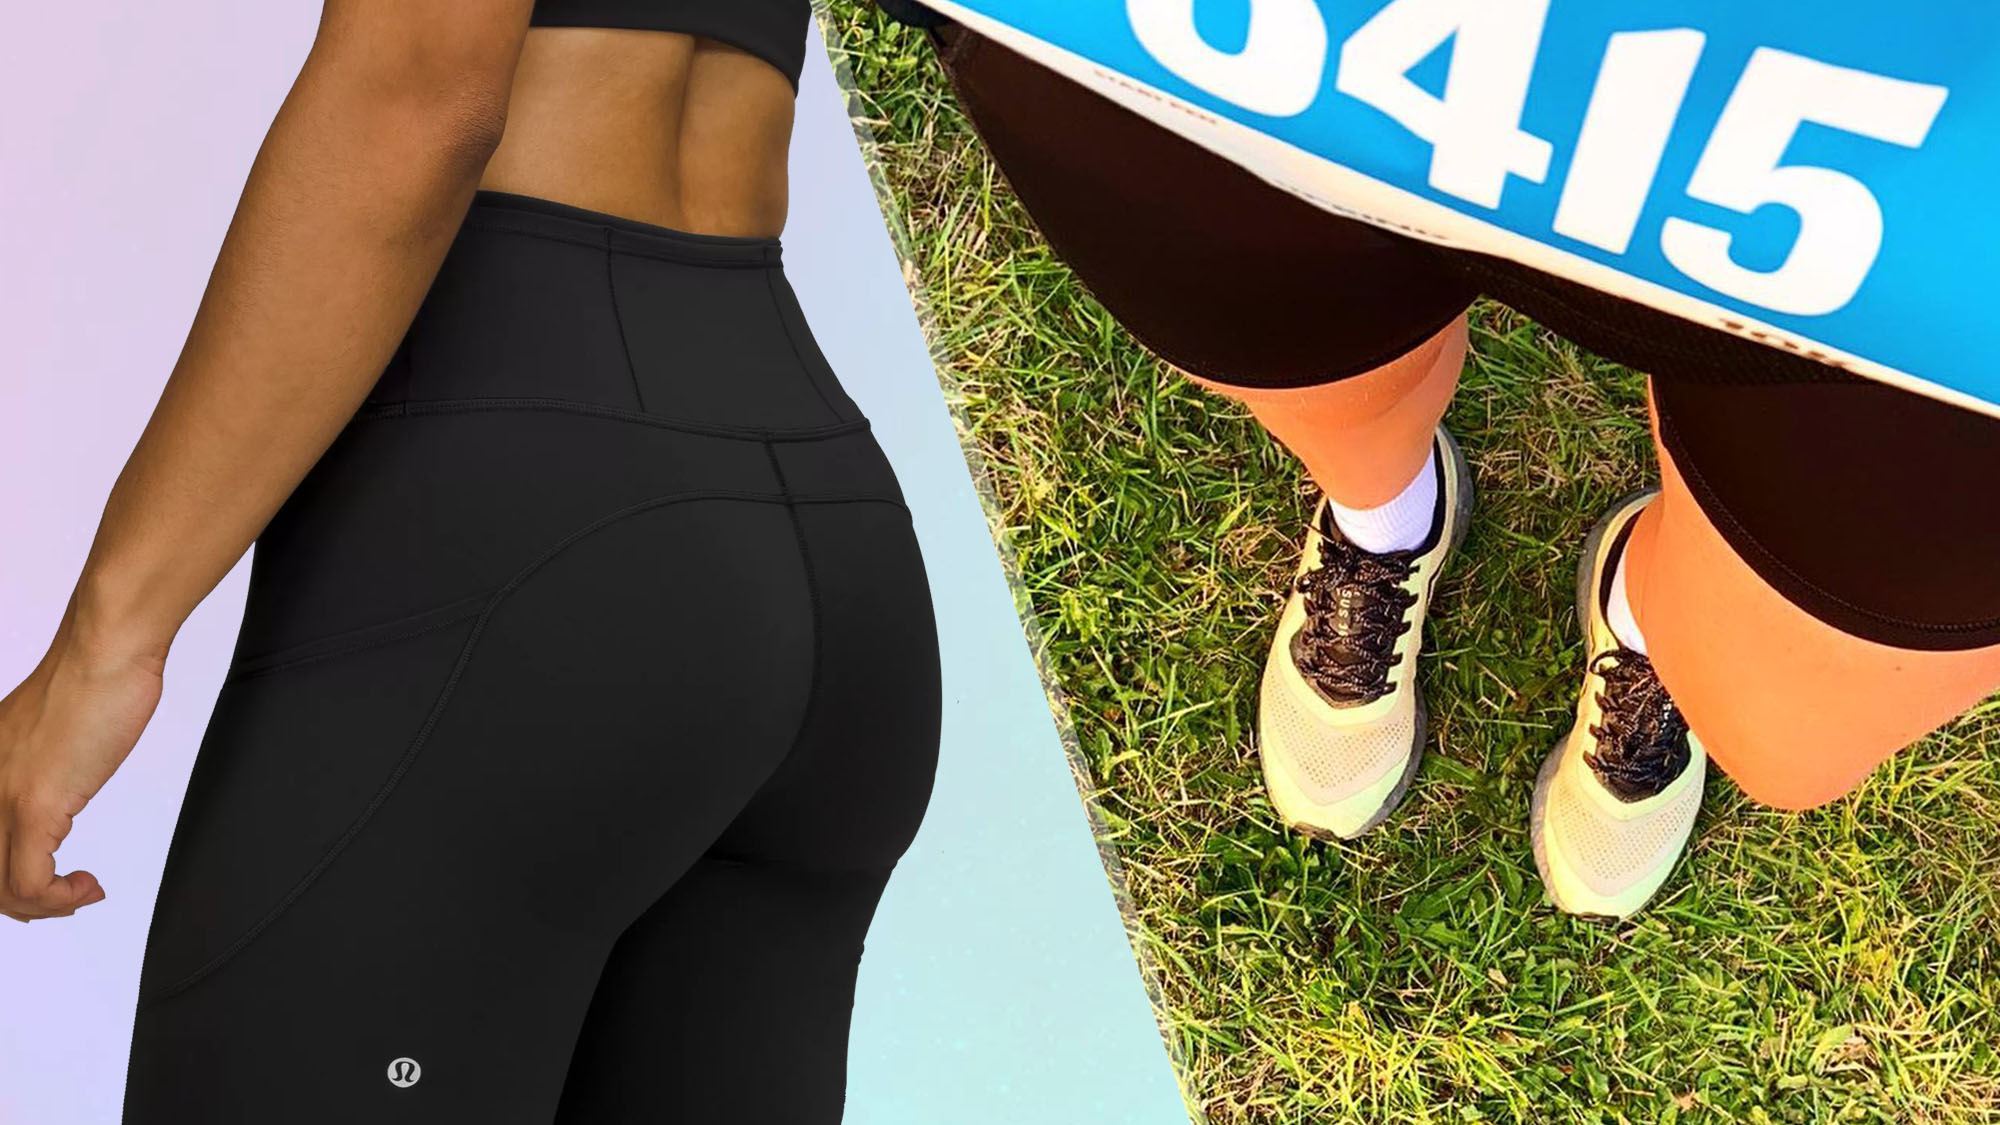 I test running shorts for a living, and these are the best pair